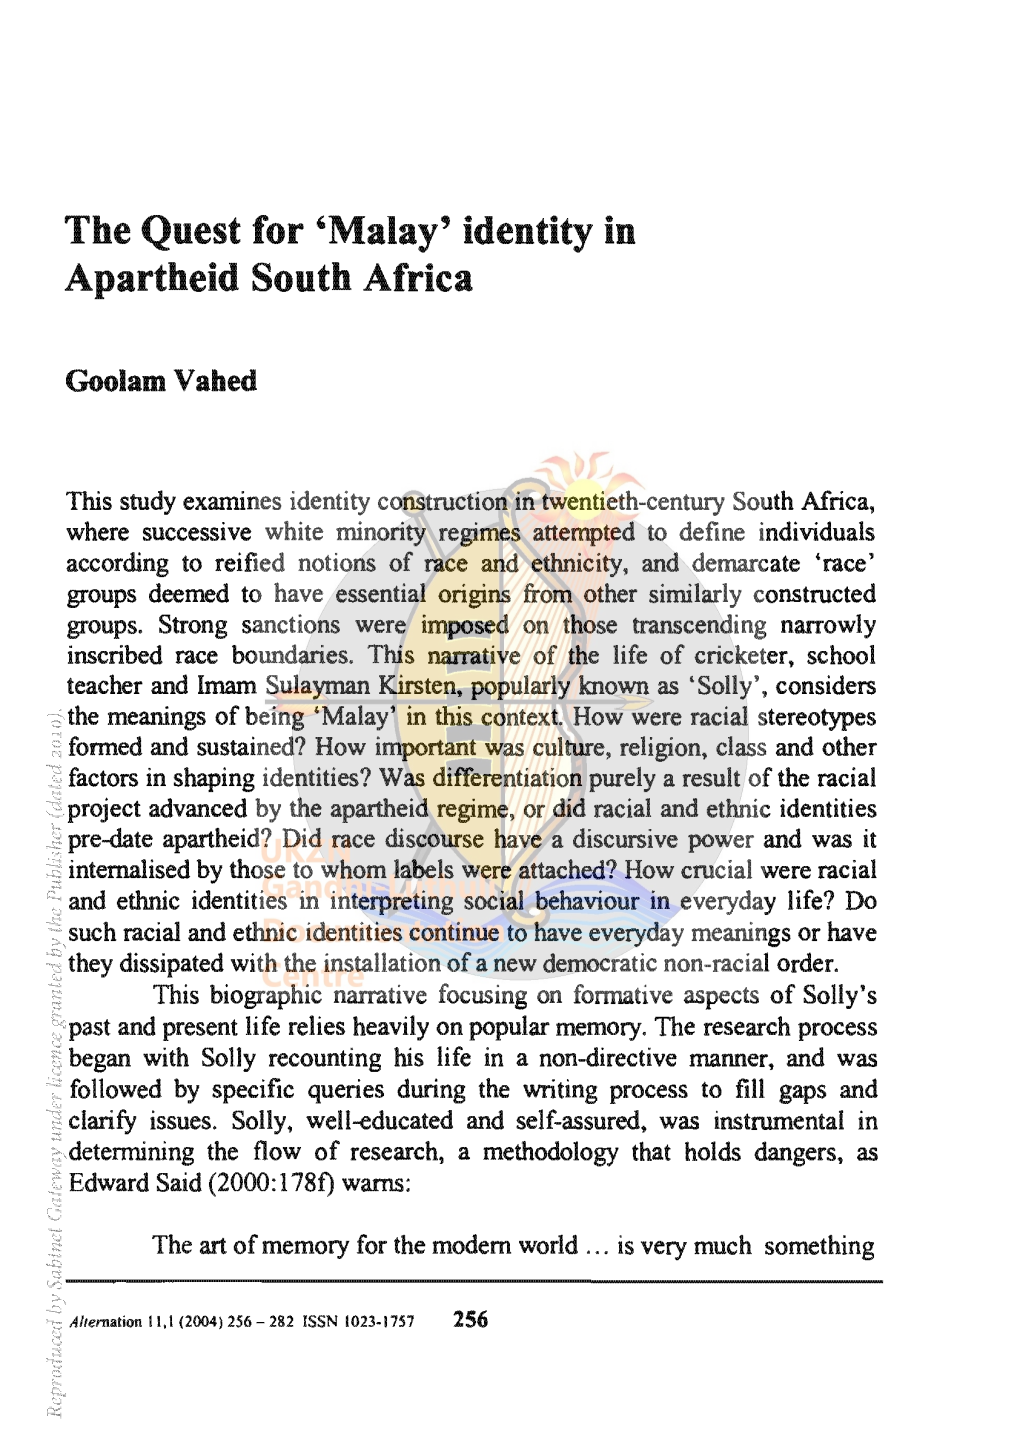 The Quest for 'Malay' Identity in Apartheid South Africa